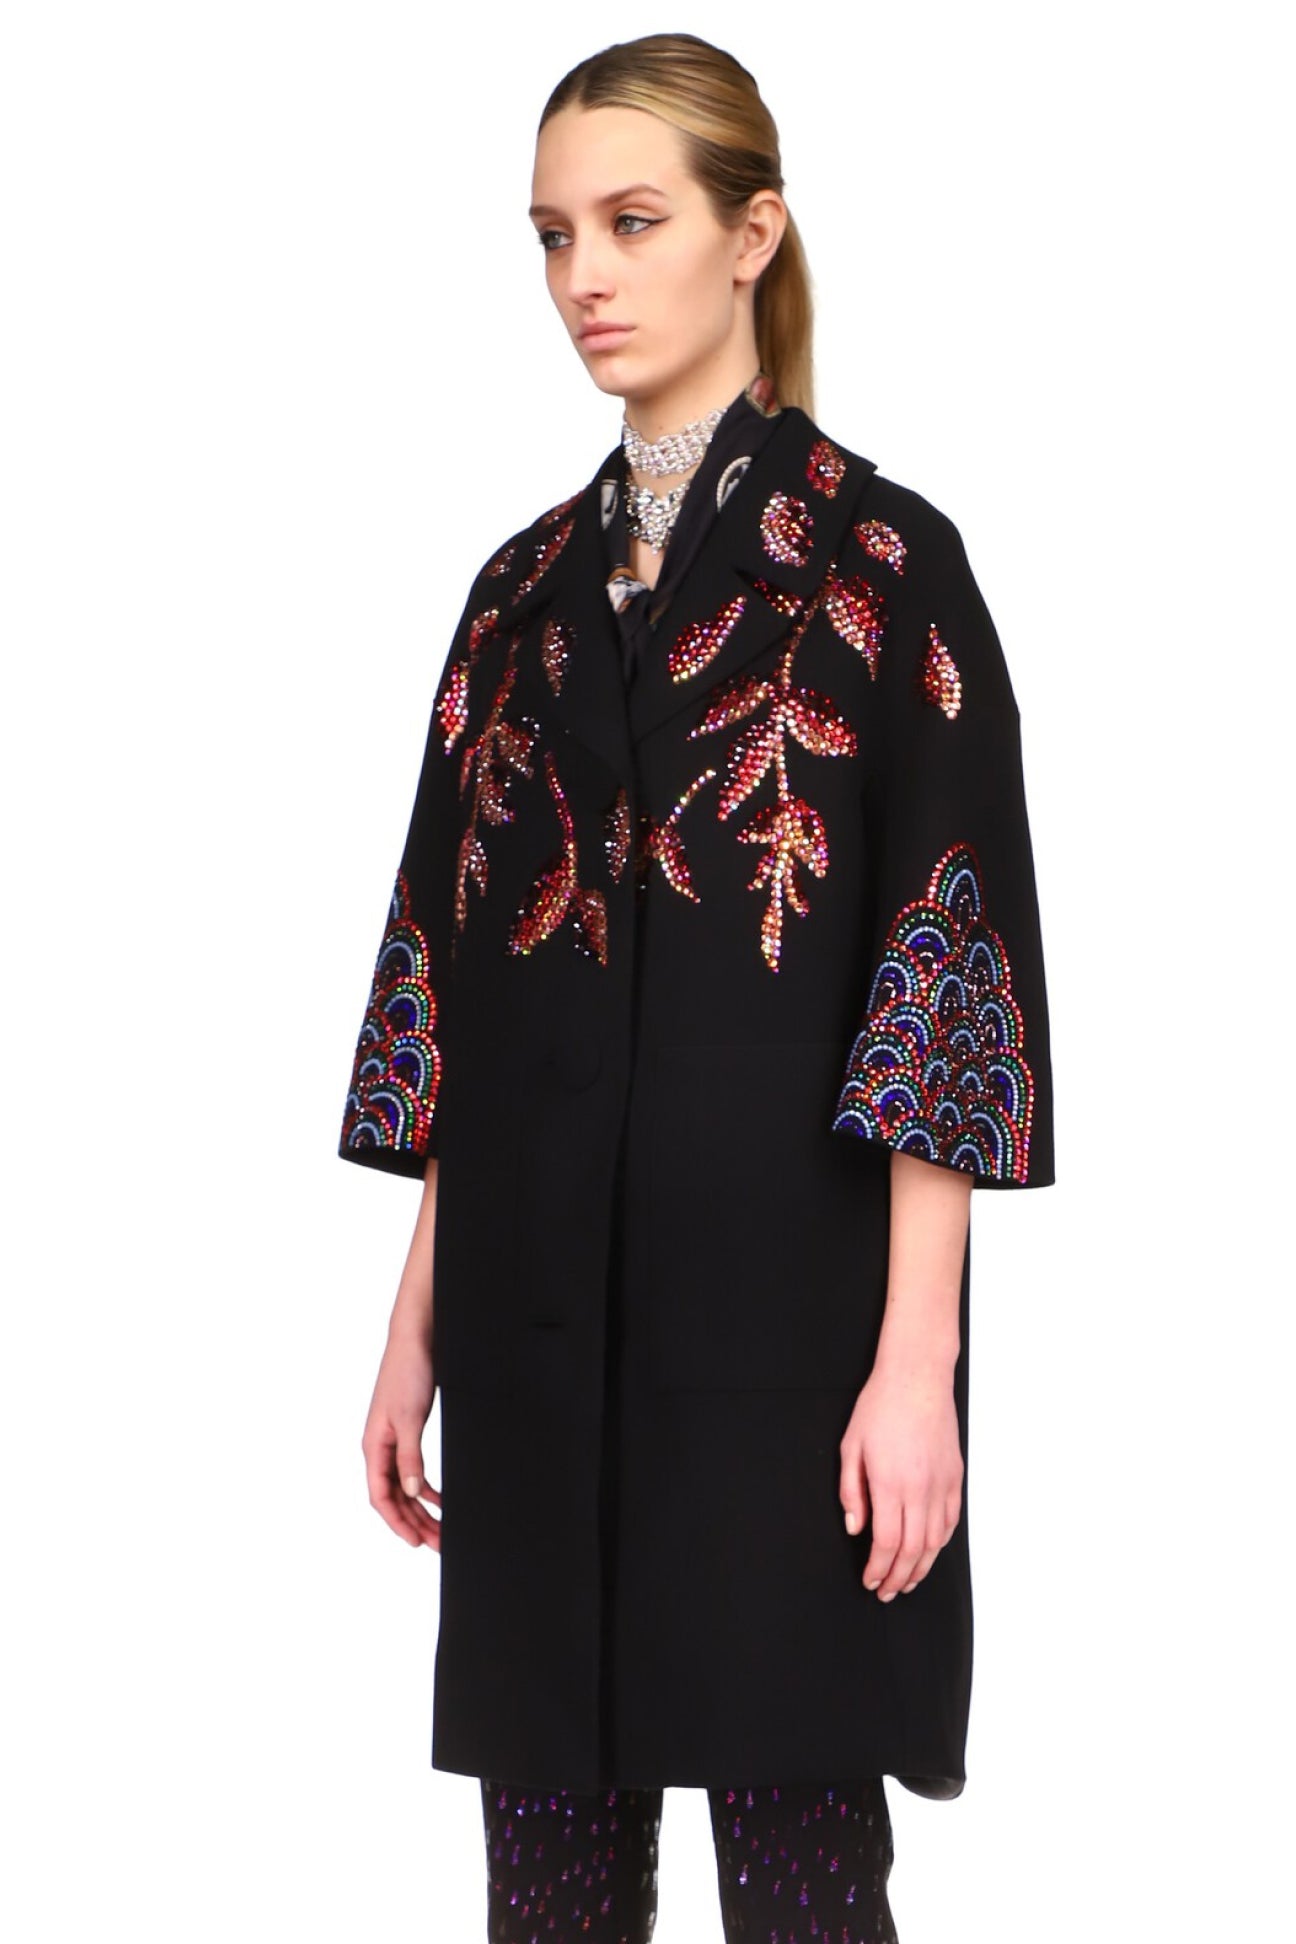 CRYSTAL 'RED WILLOW' PATCH POCKET COAT - COATS - Libertine